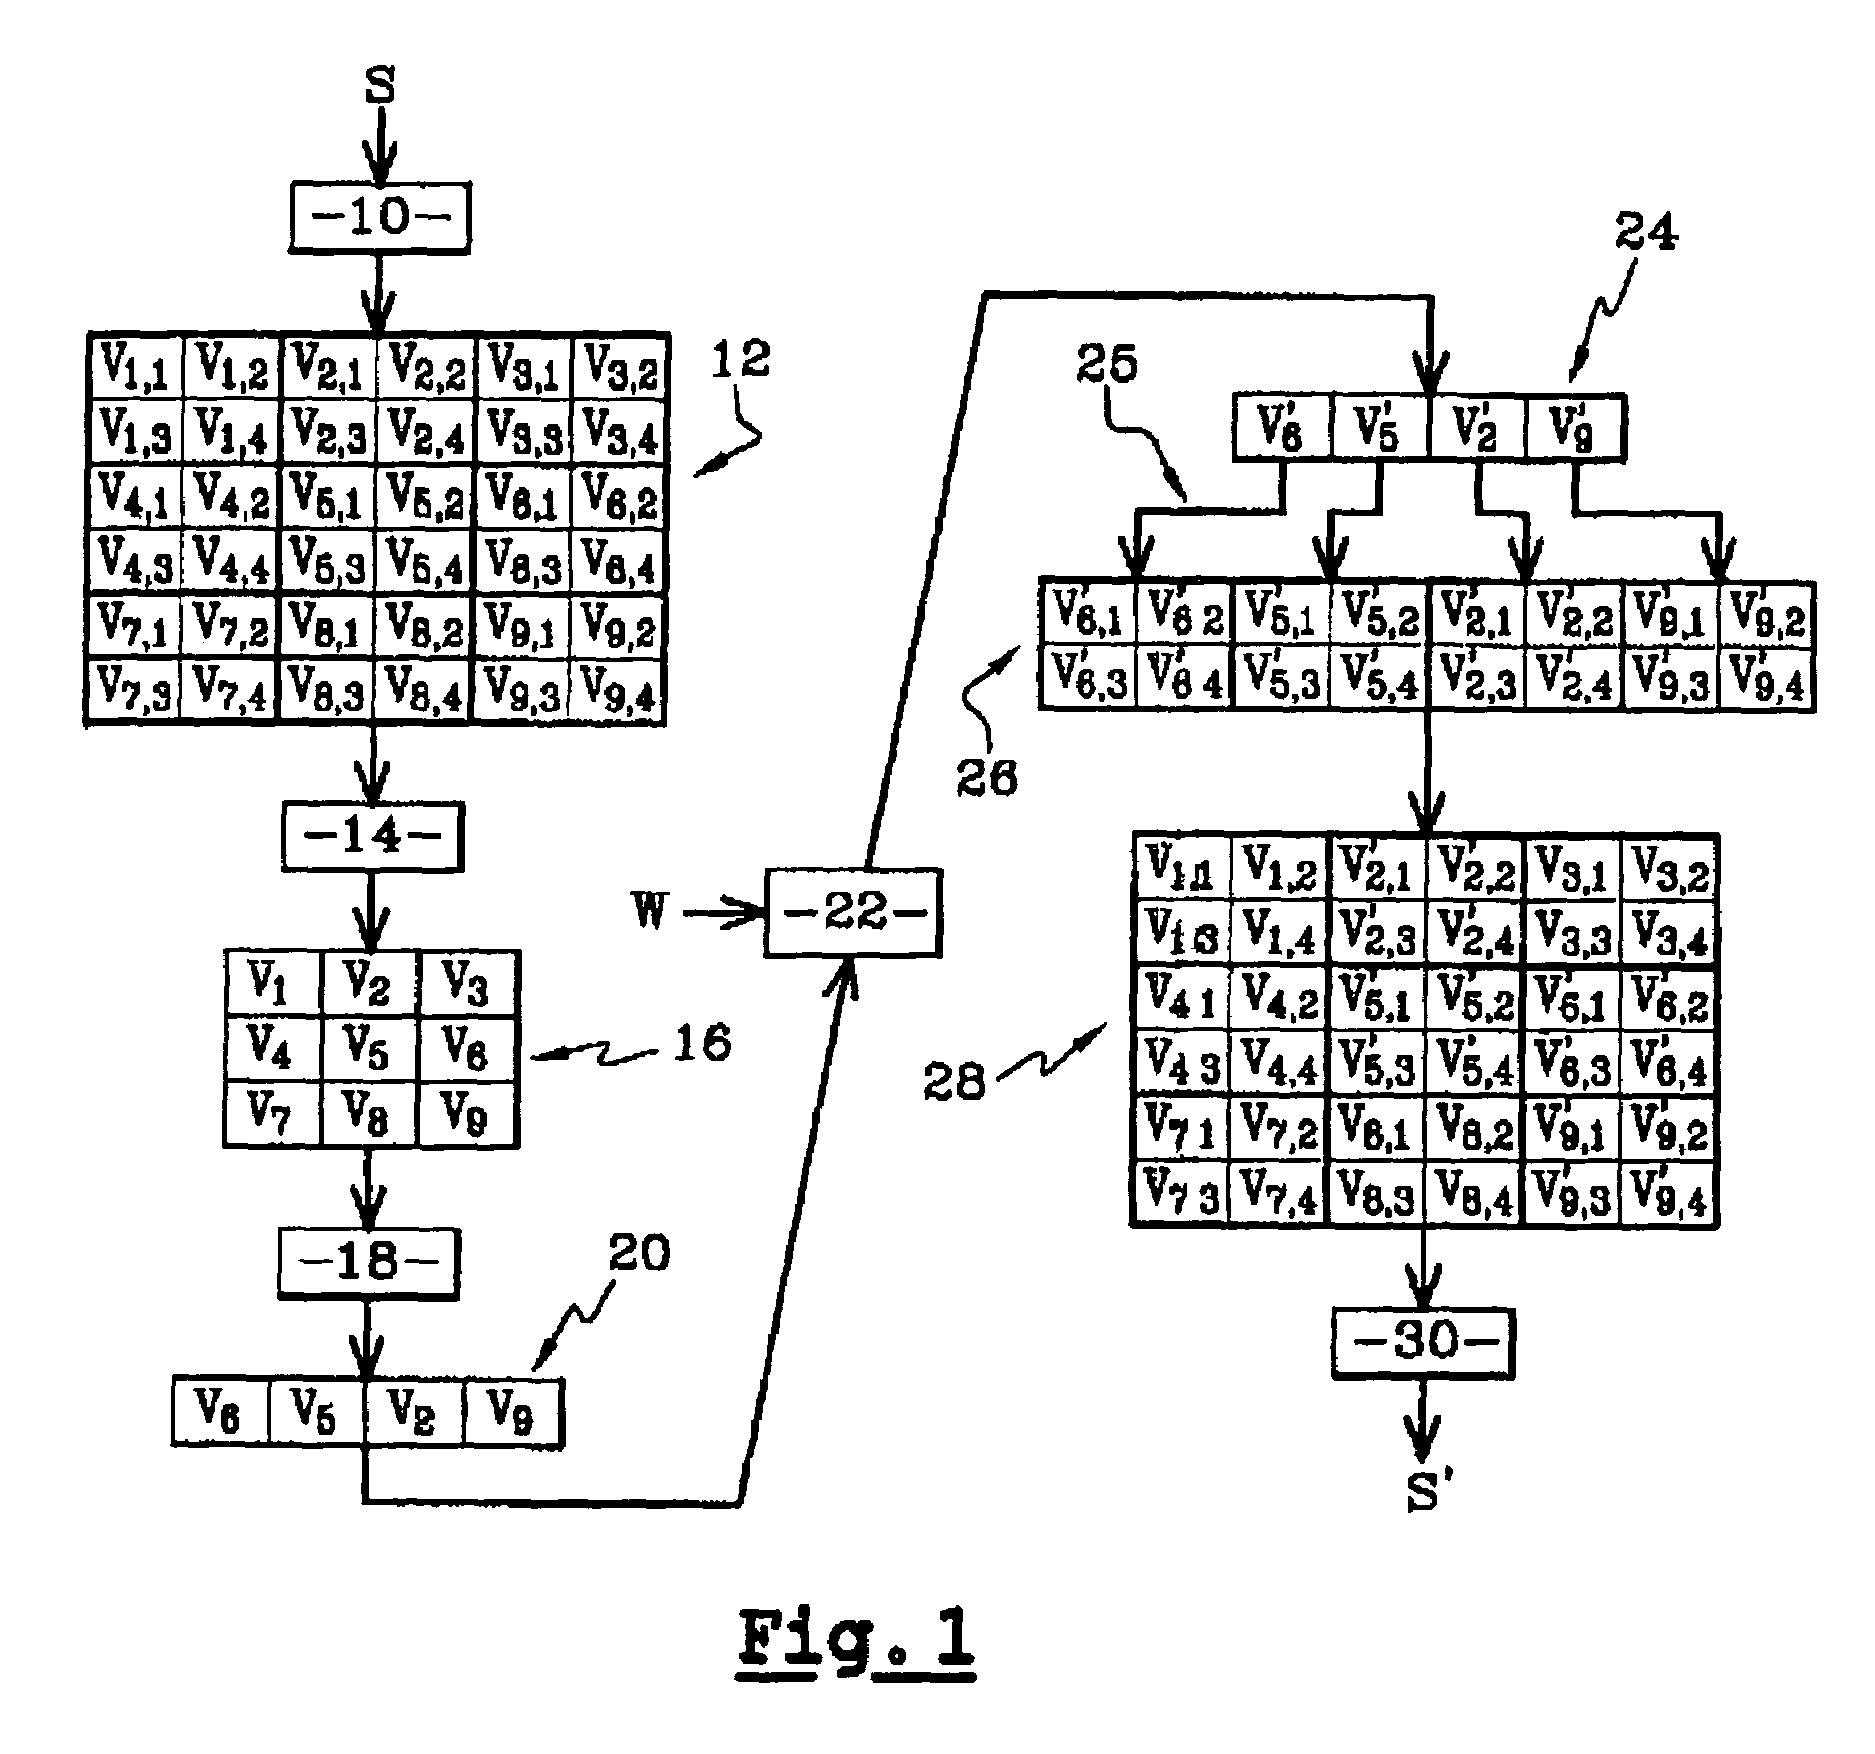 System and method of watermarking a video signal and extracting the watermarking from a video signal